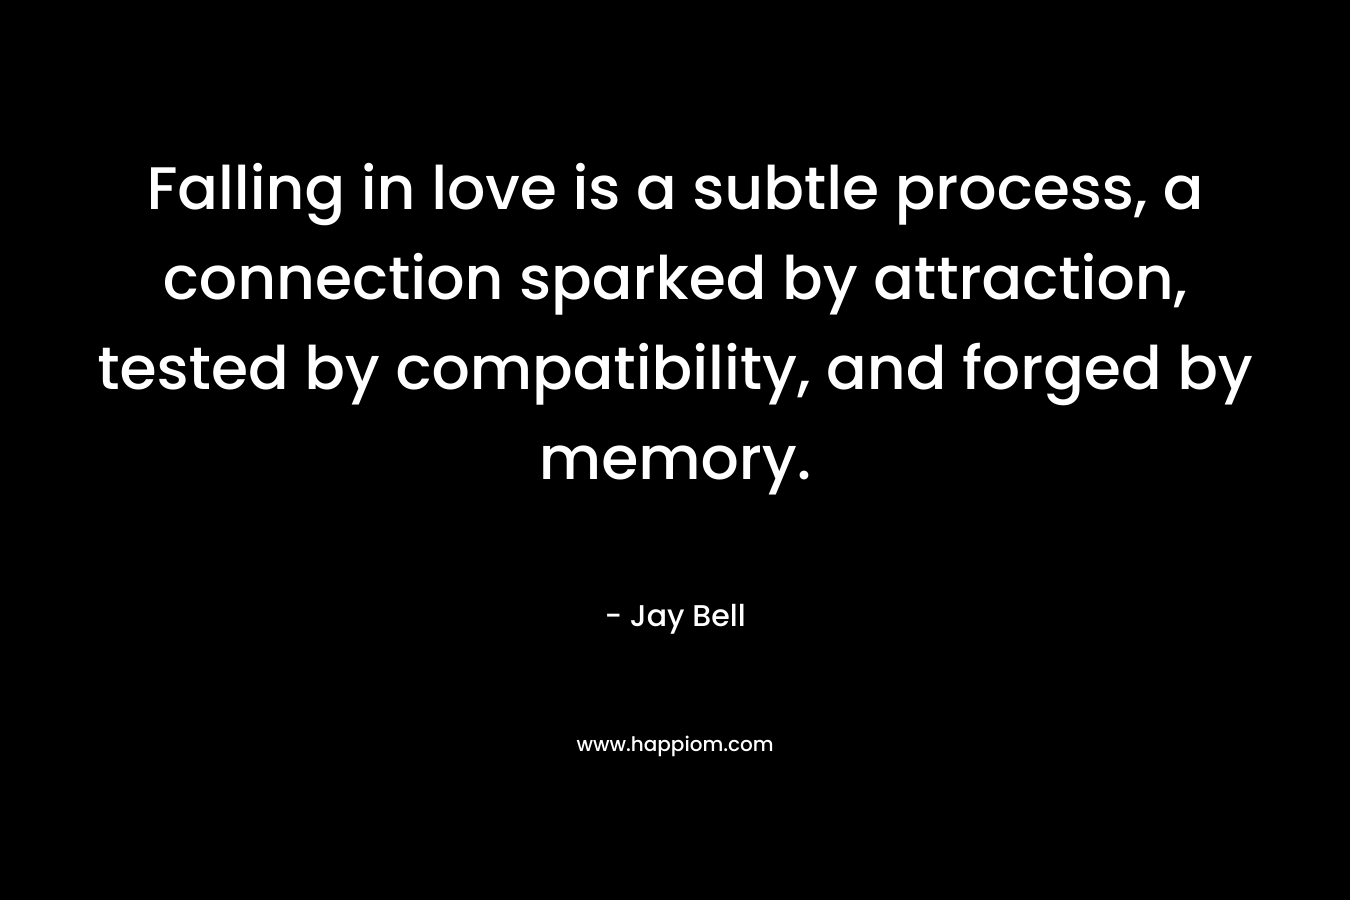 Falling in love is a subtle process, a connection sparked by attraction, tested by compatibility, and forged by memory.